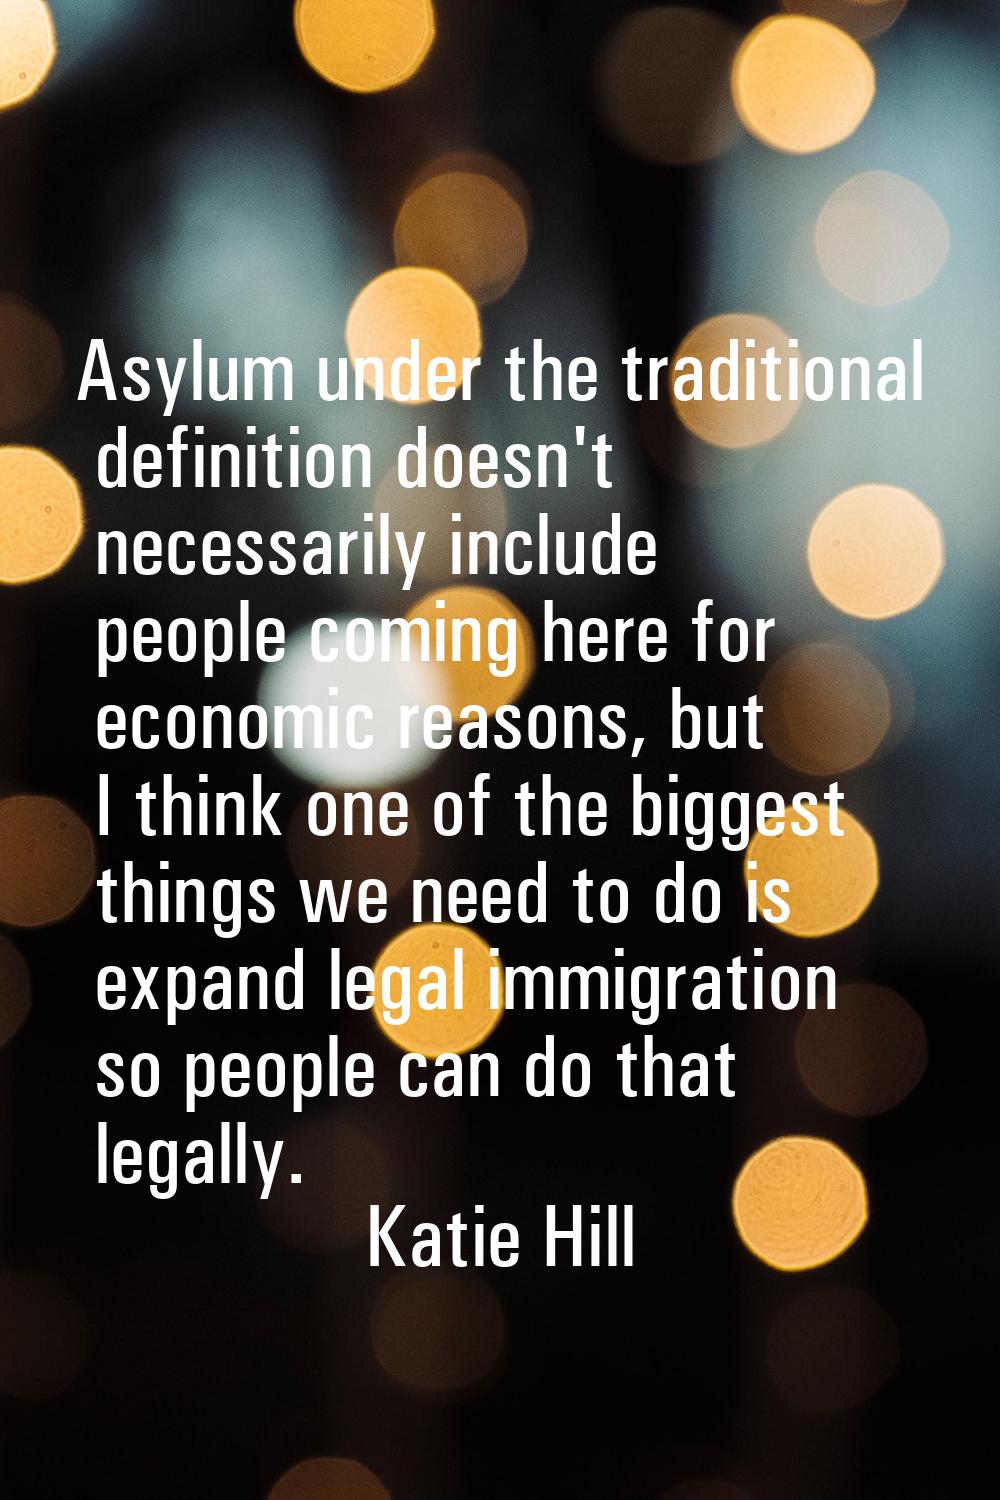 Asylum under the traditional definition doesn't necessarily include people coming here for economic